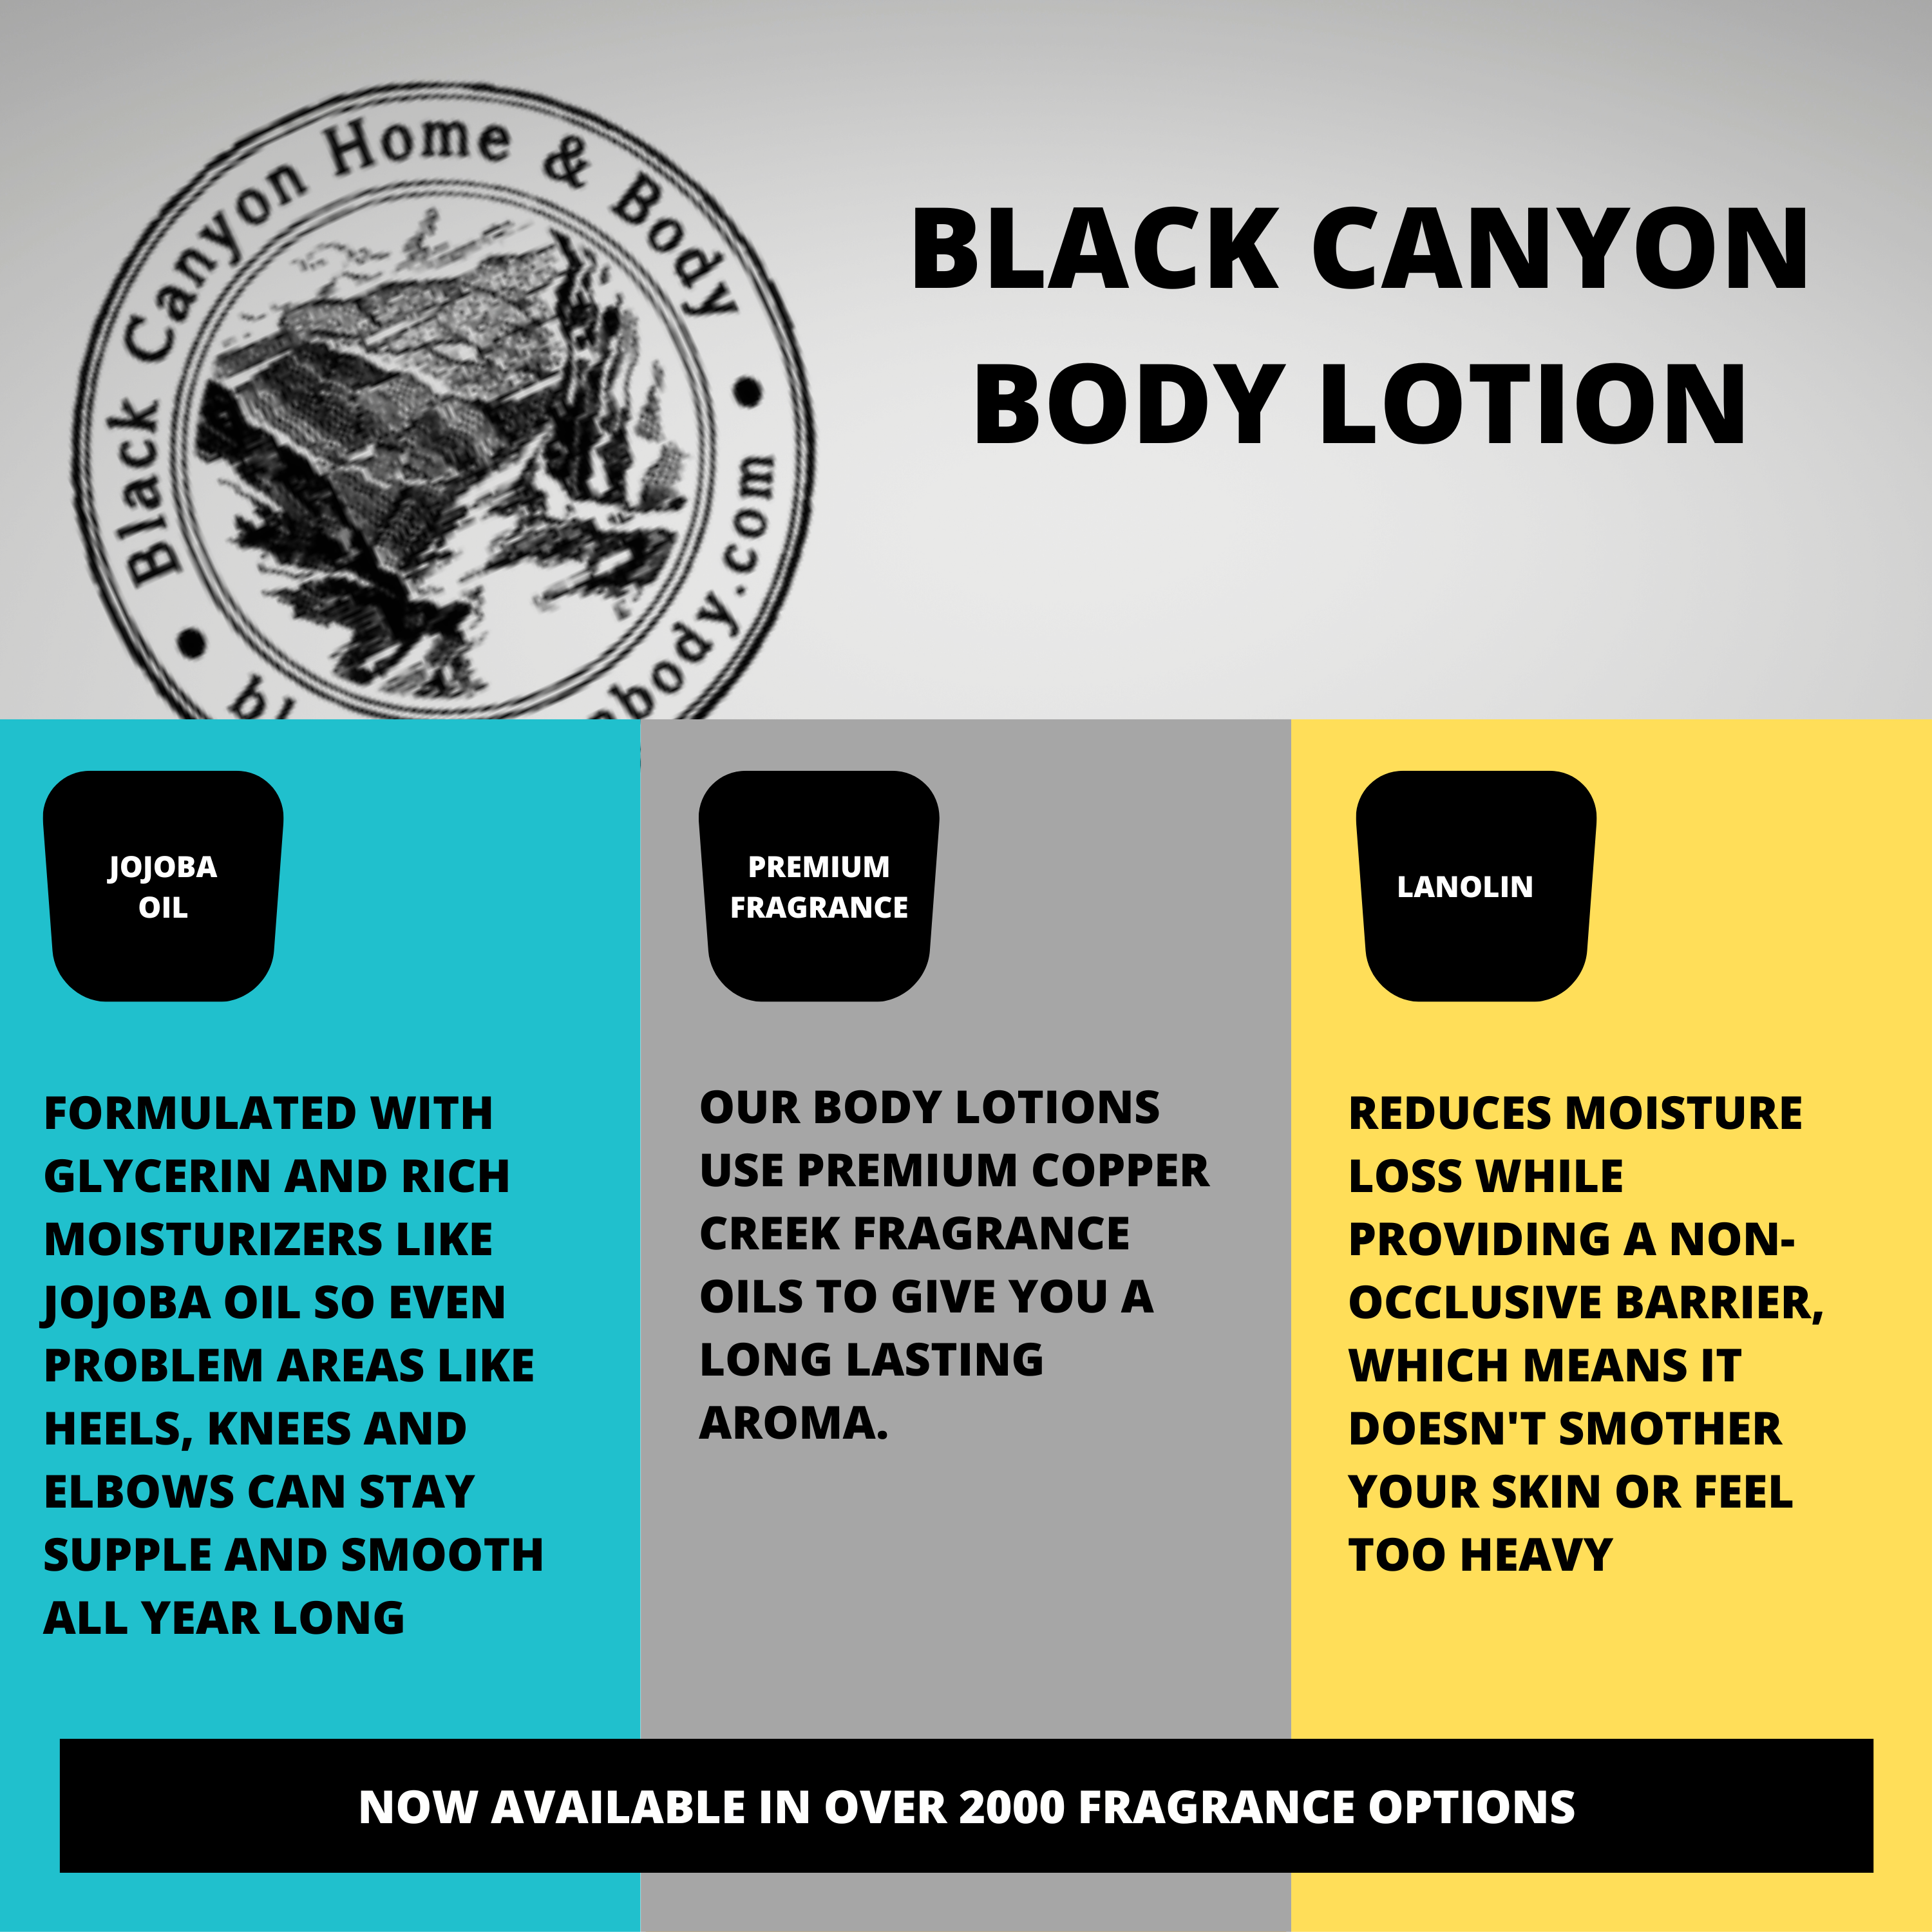 Black Canyon Apple Berry Ice Scented Luxury Body Lotion with Lanolin and Jojoba Oil